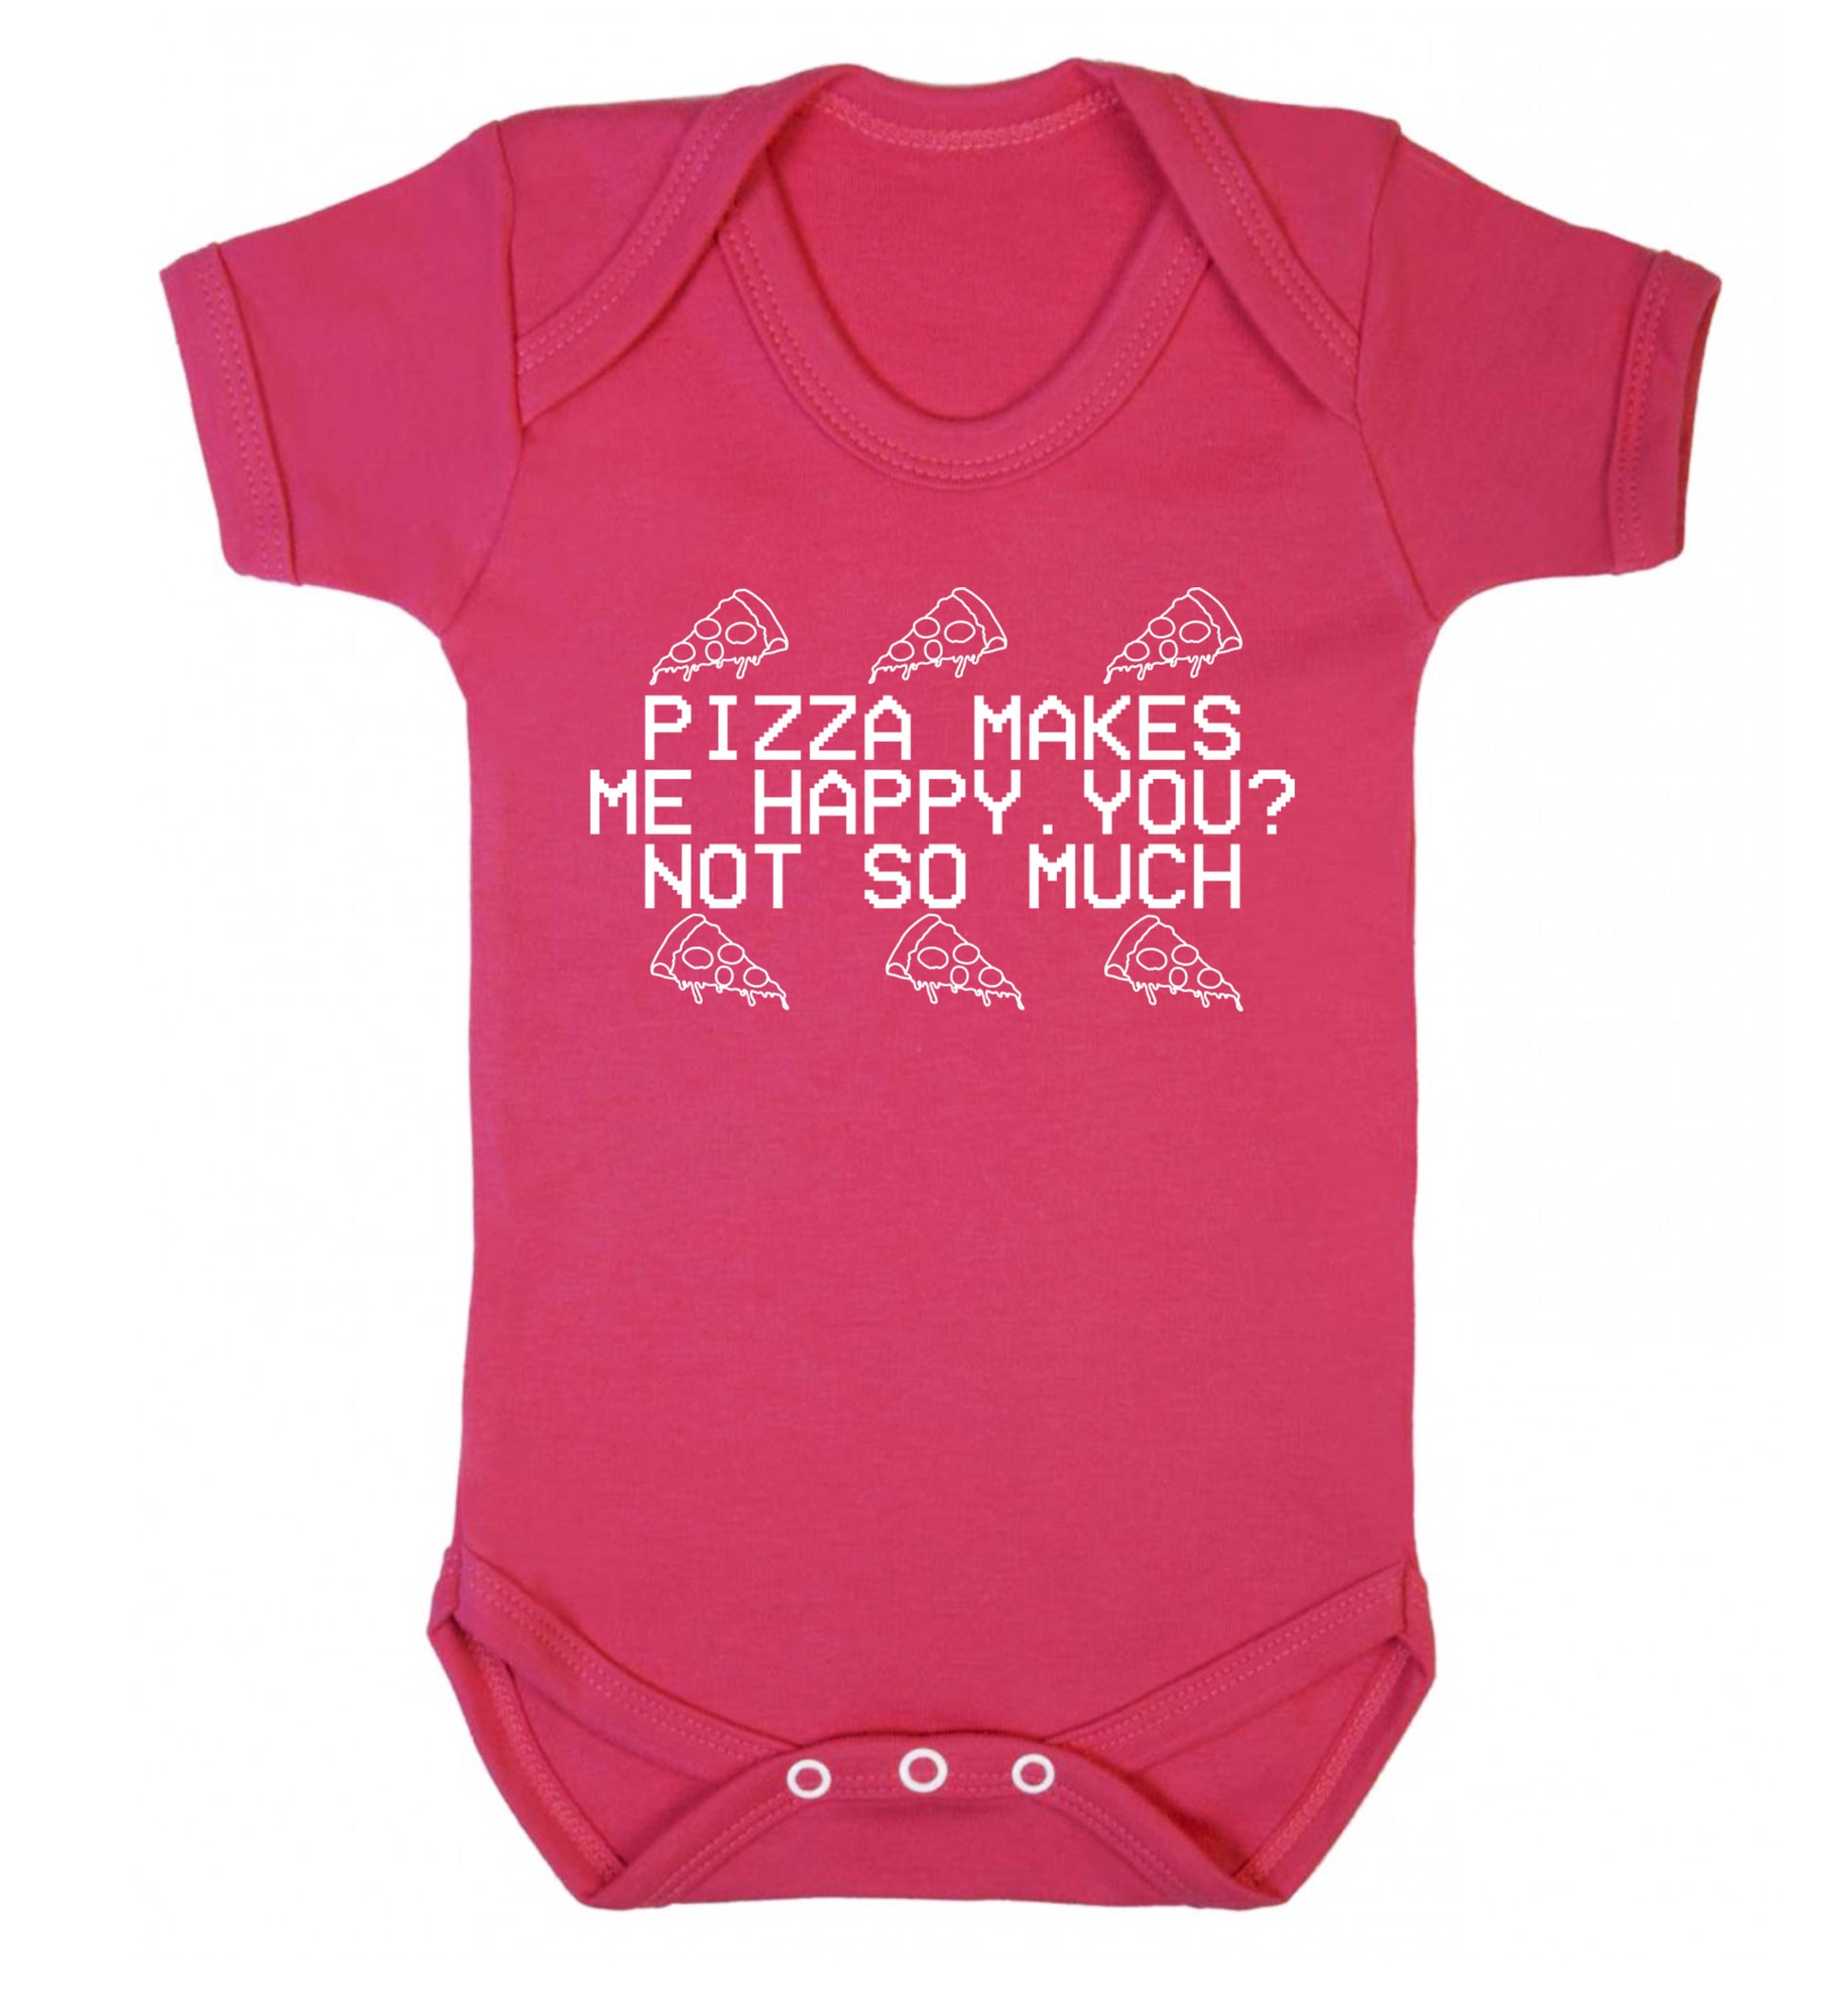 Pizza makes me happy, You? Not so much Baby Vest dark pink 18-24 months